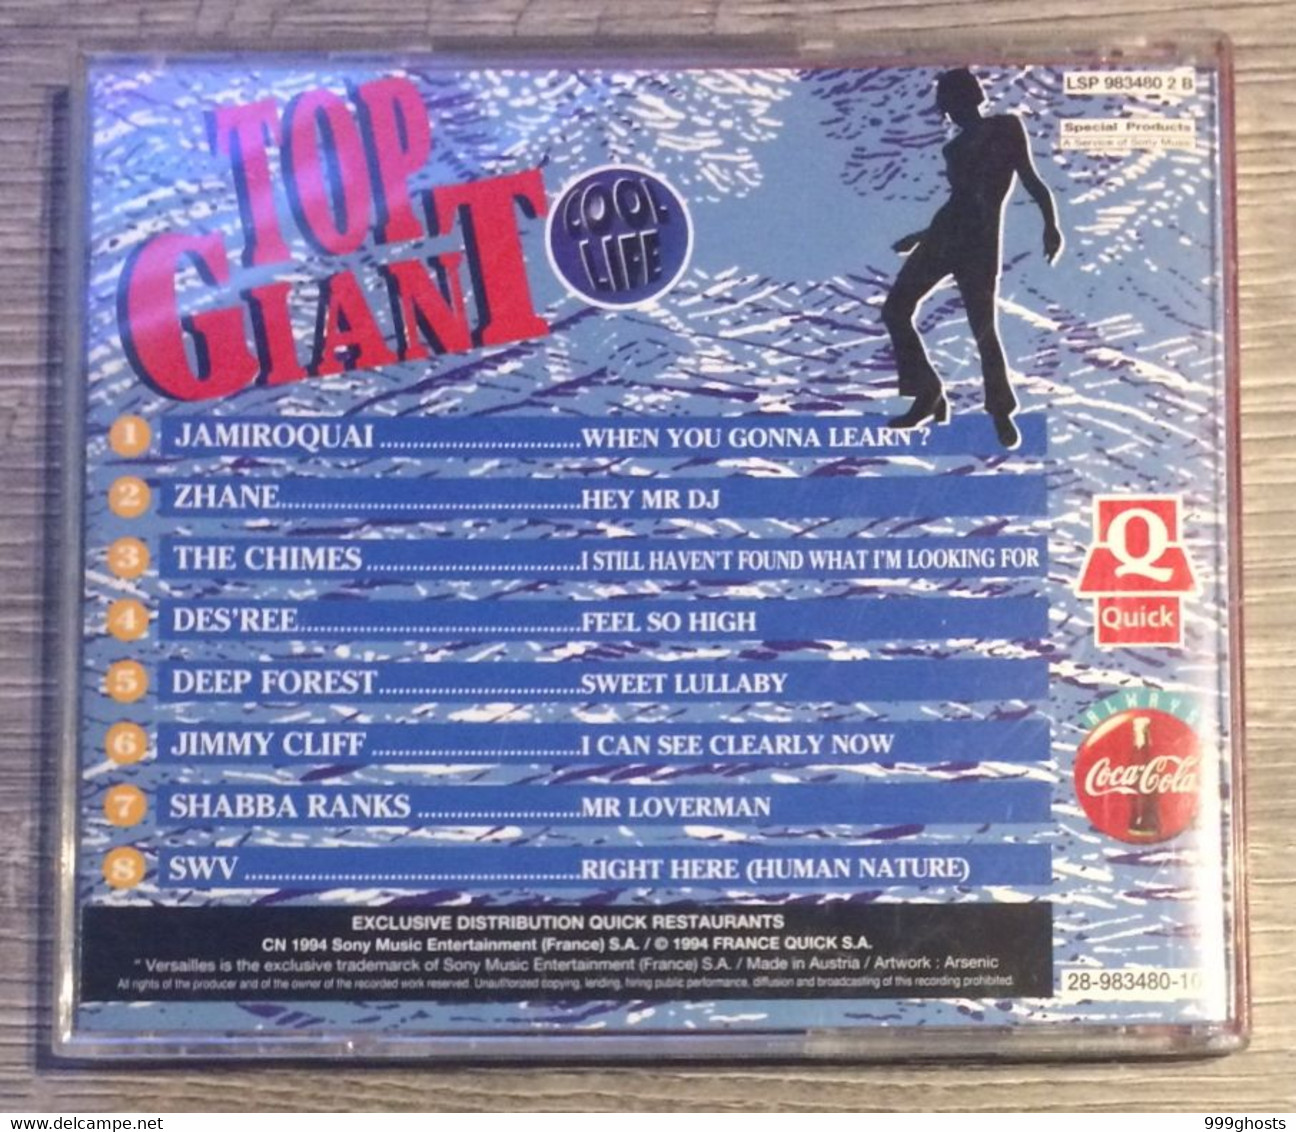 QUICK CD TOP GAINT (Case Damaged, CD Good) JAMIROQUAI SHABBA RANKS ZHANE JIMMY CLIFF DES'REE DEEP FOREST THE CHIMES SWV - Compilaties